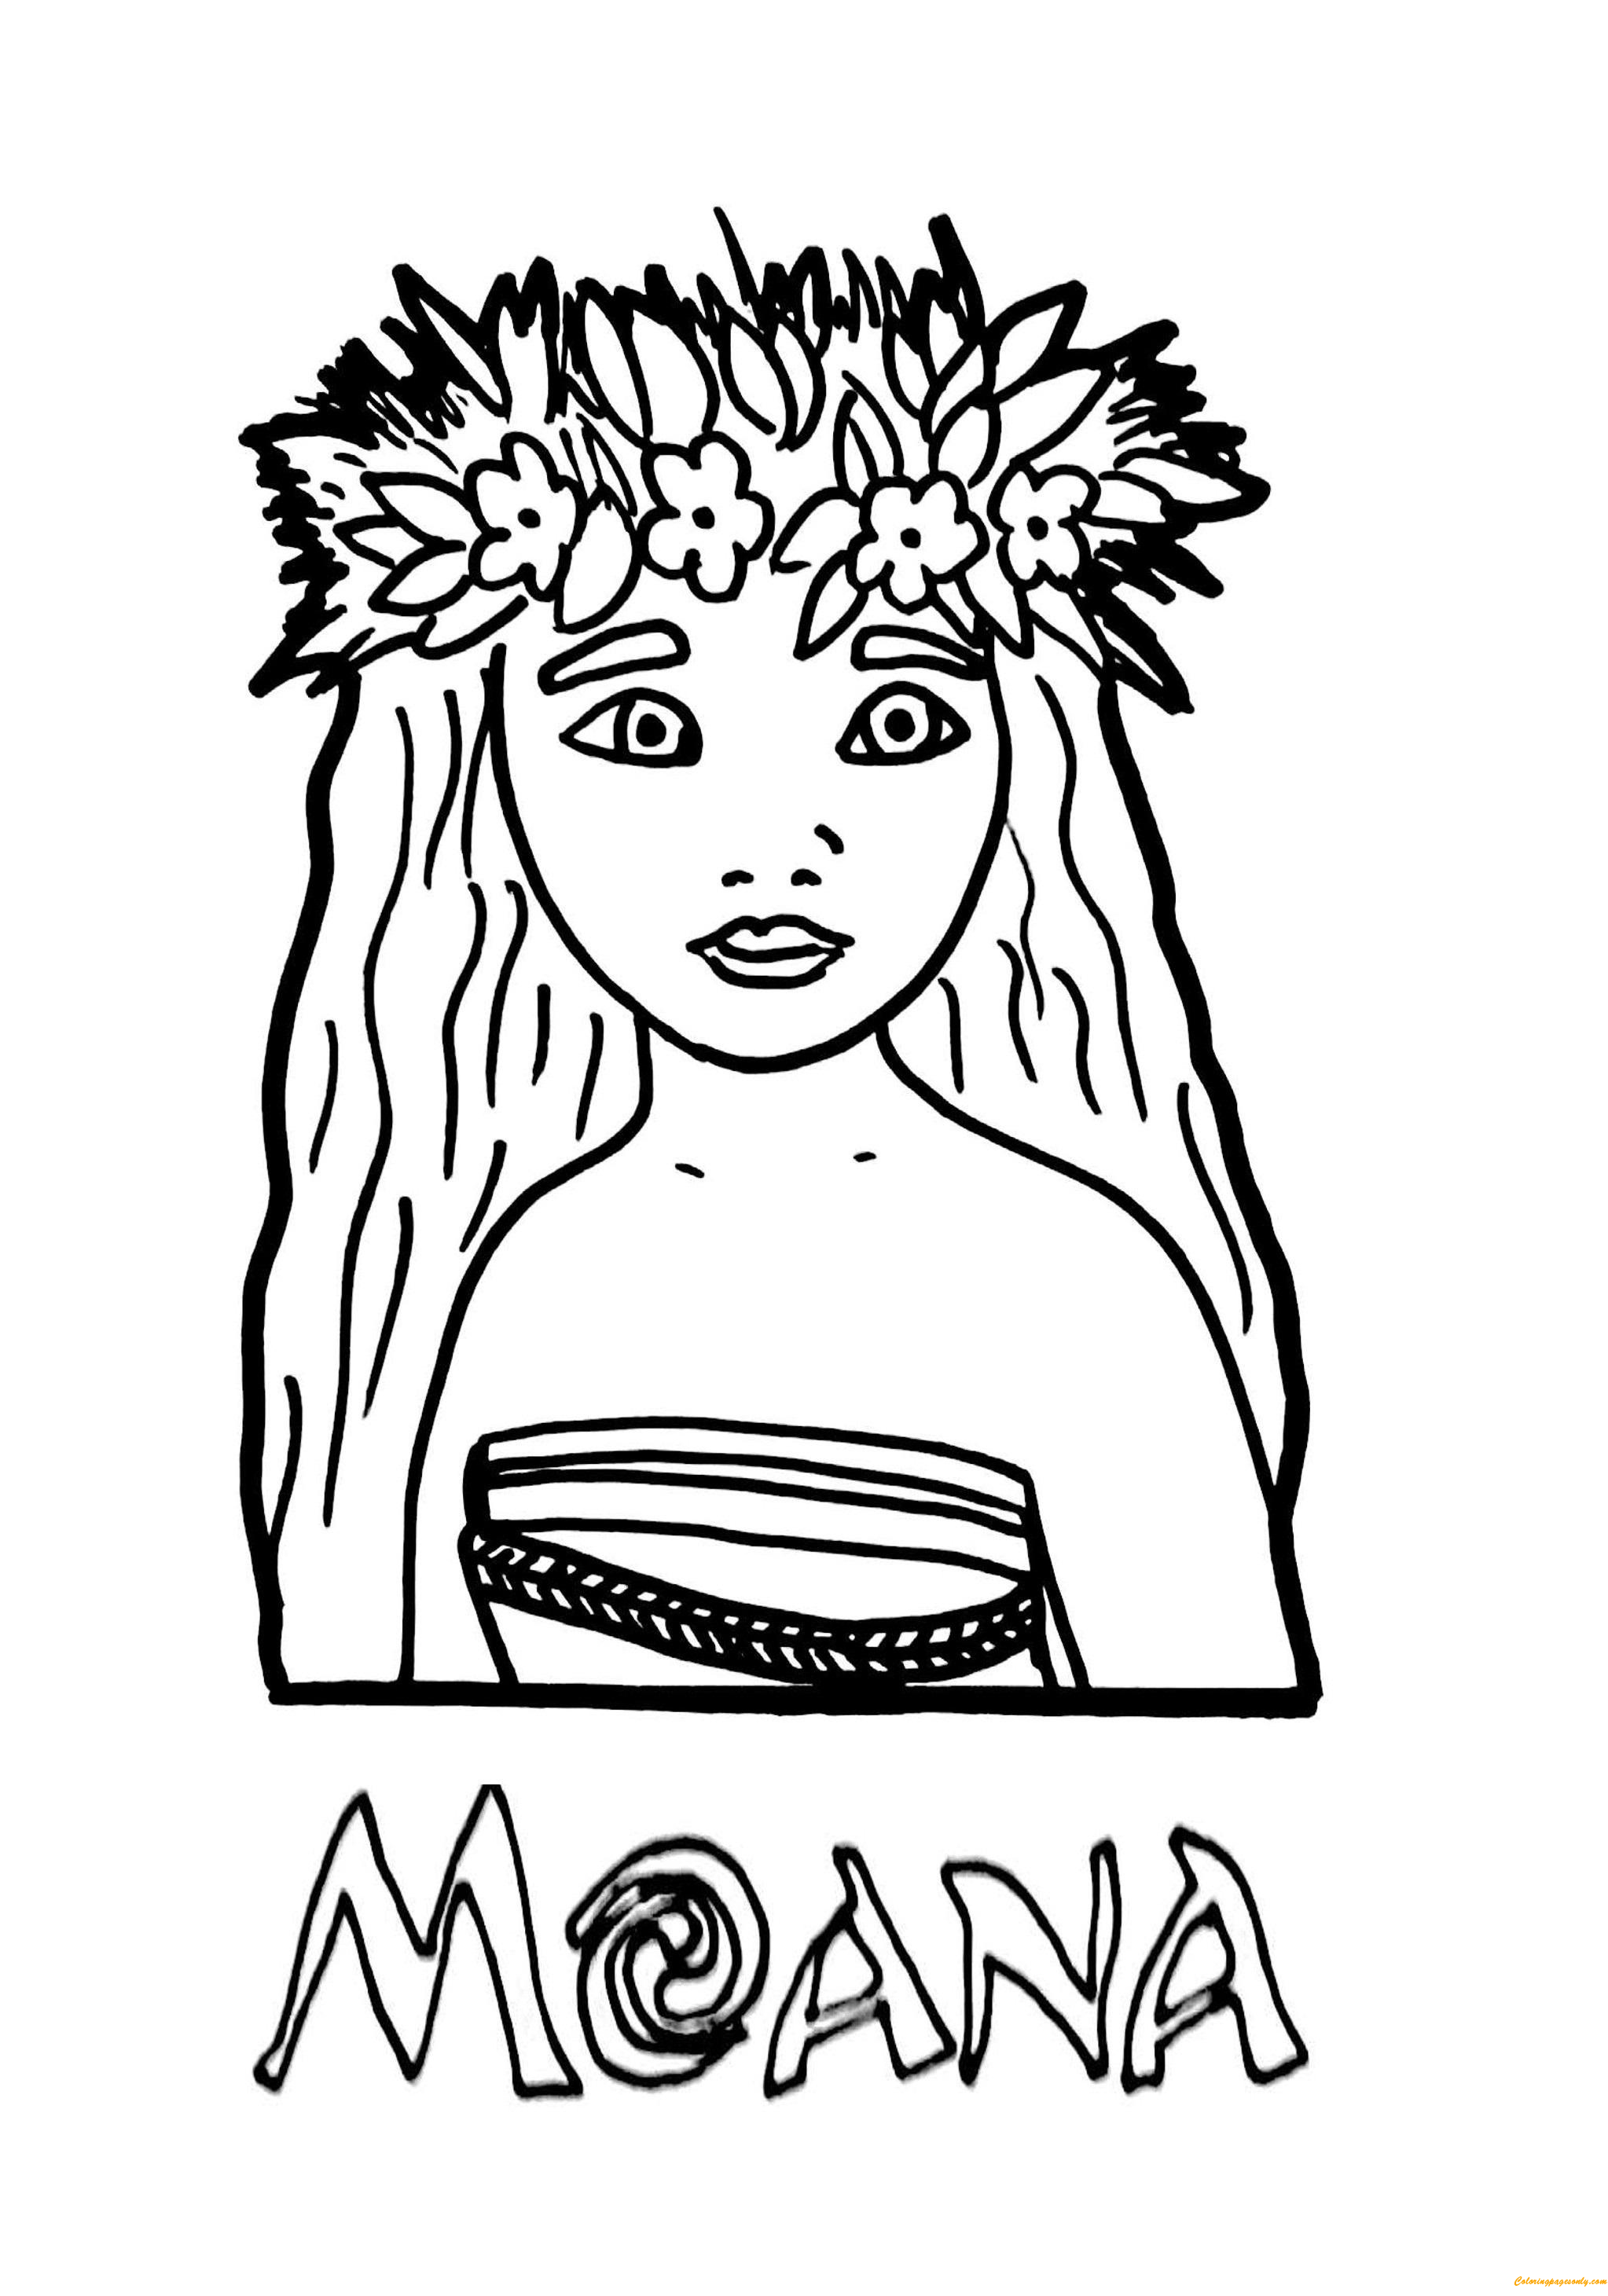 Princess Moana Coloring Page - Free Coloring Pages Online